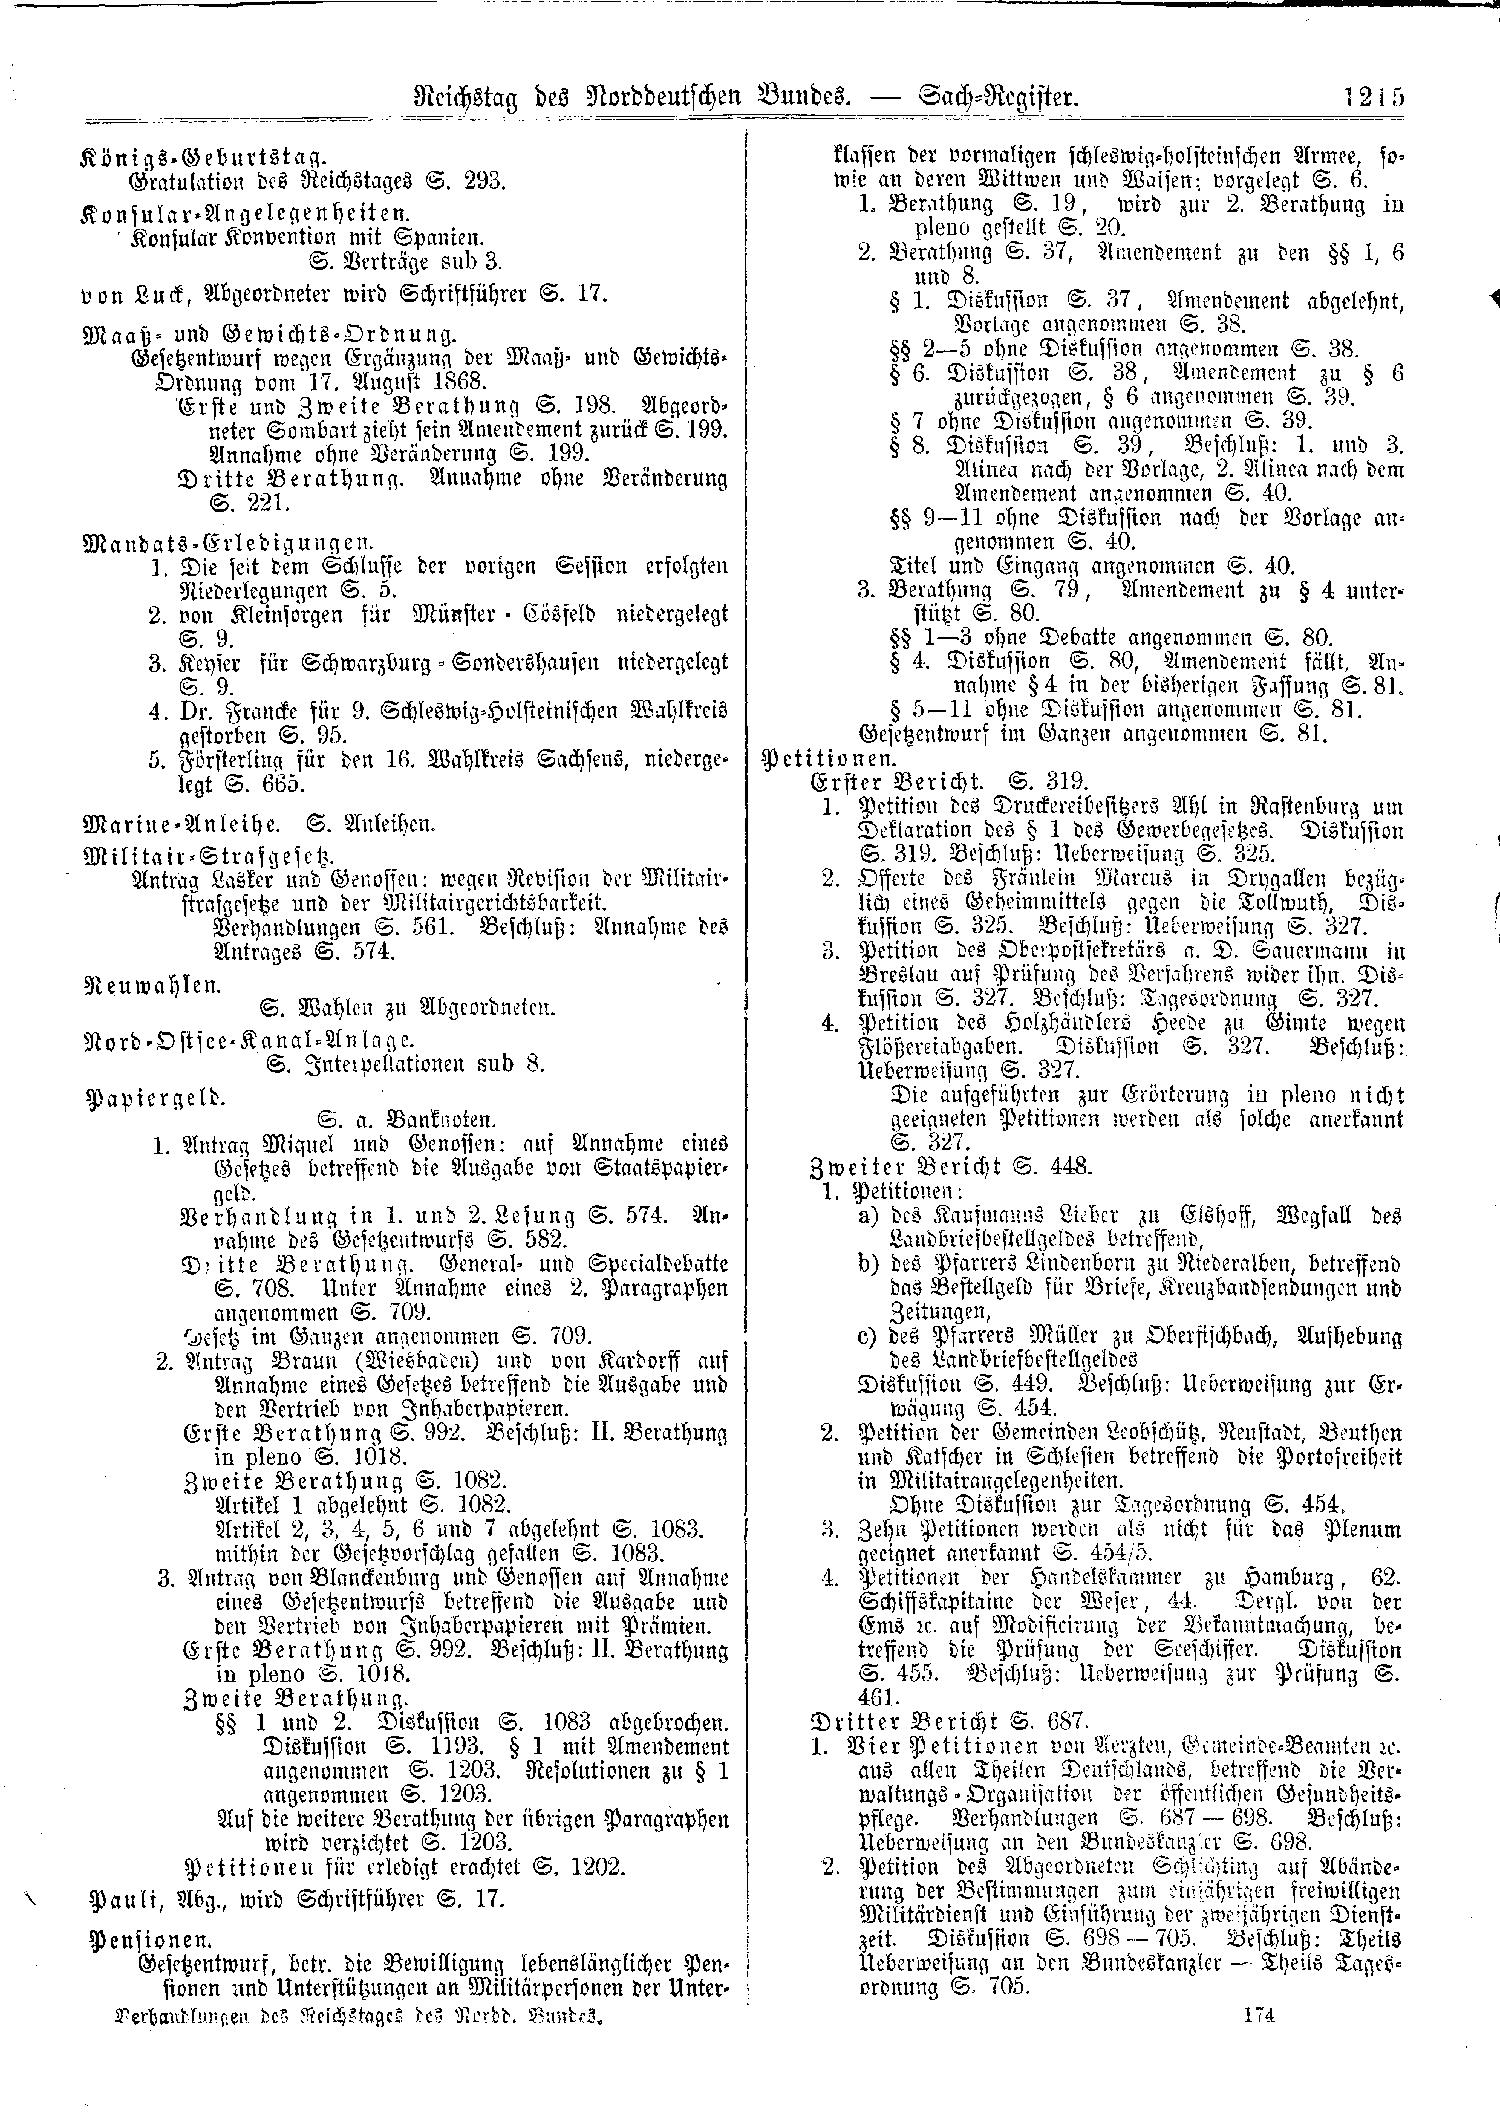 Scan of page 1215